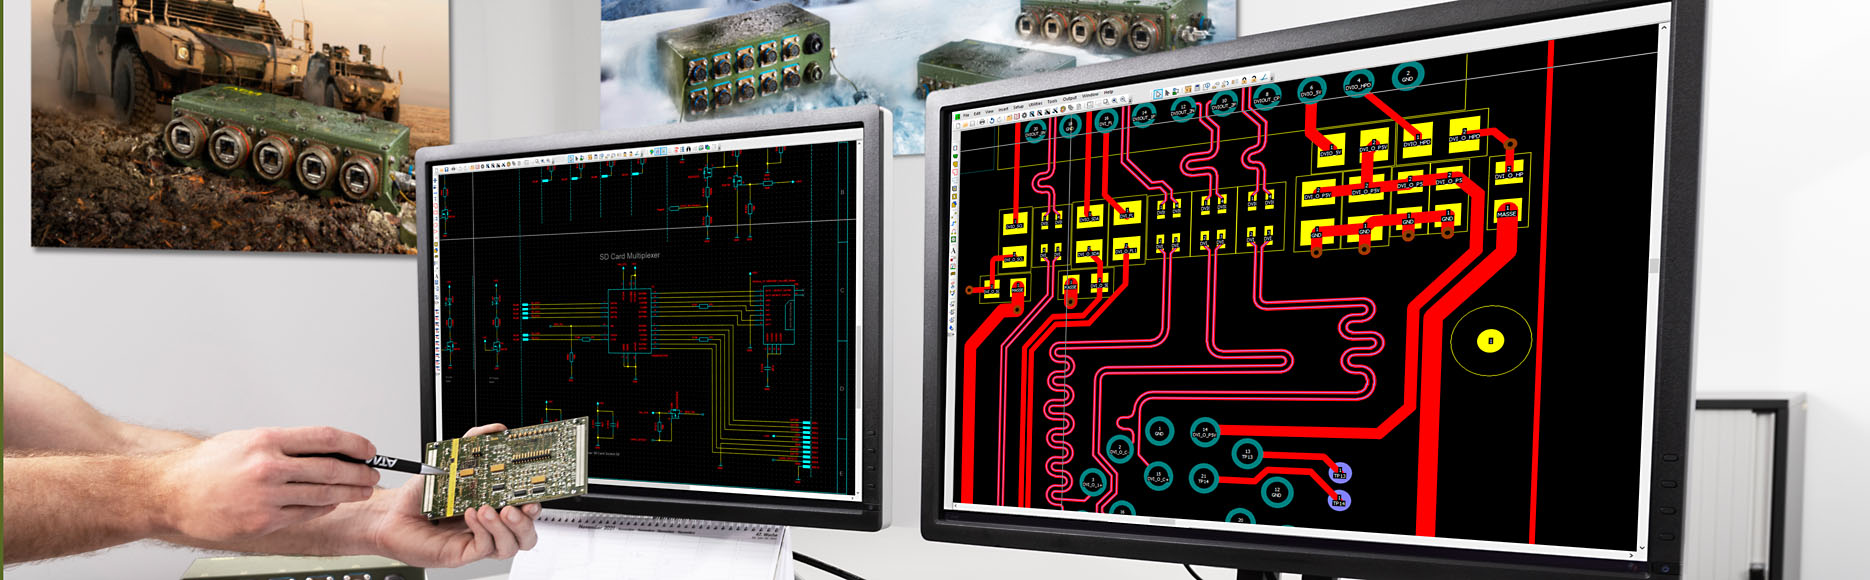 Person showing circuit board and a circuit can be seen on the screen